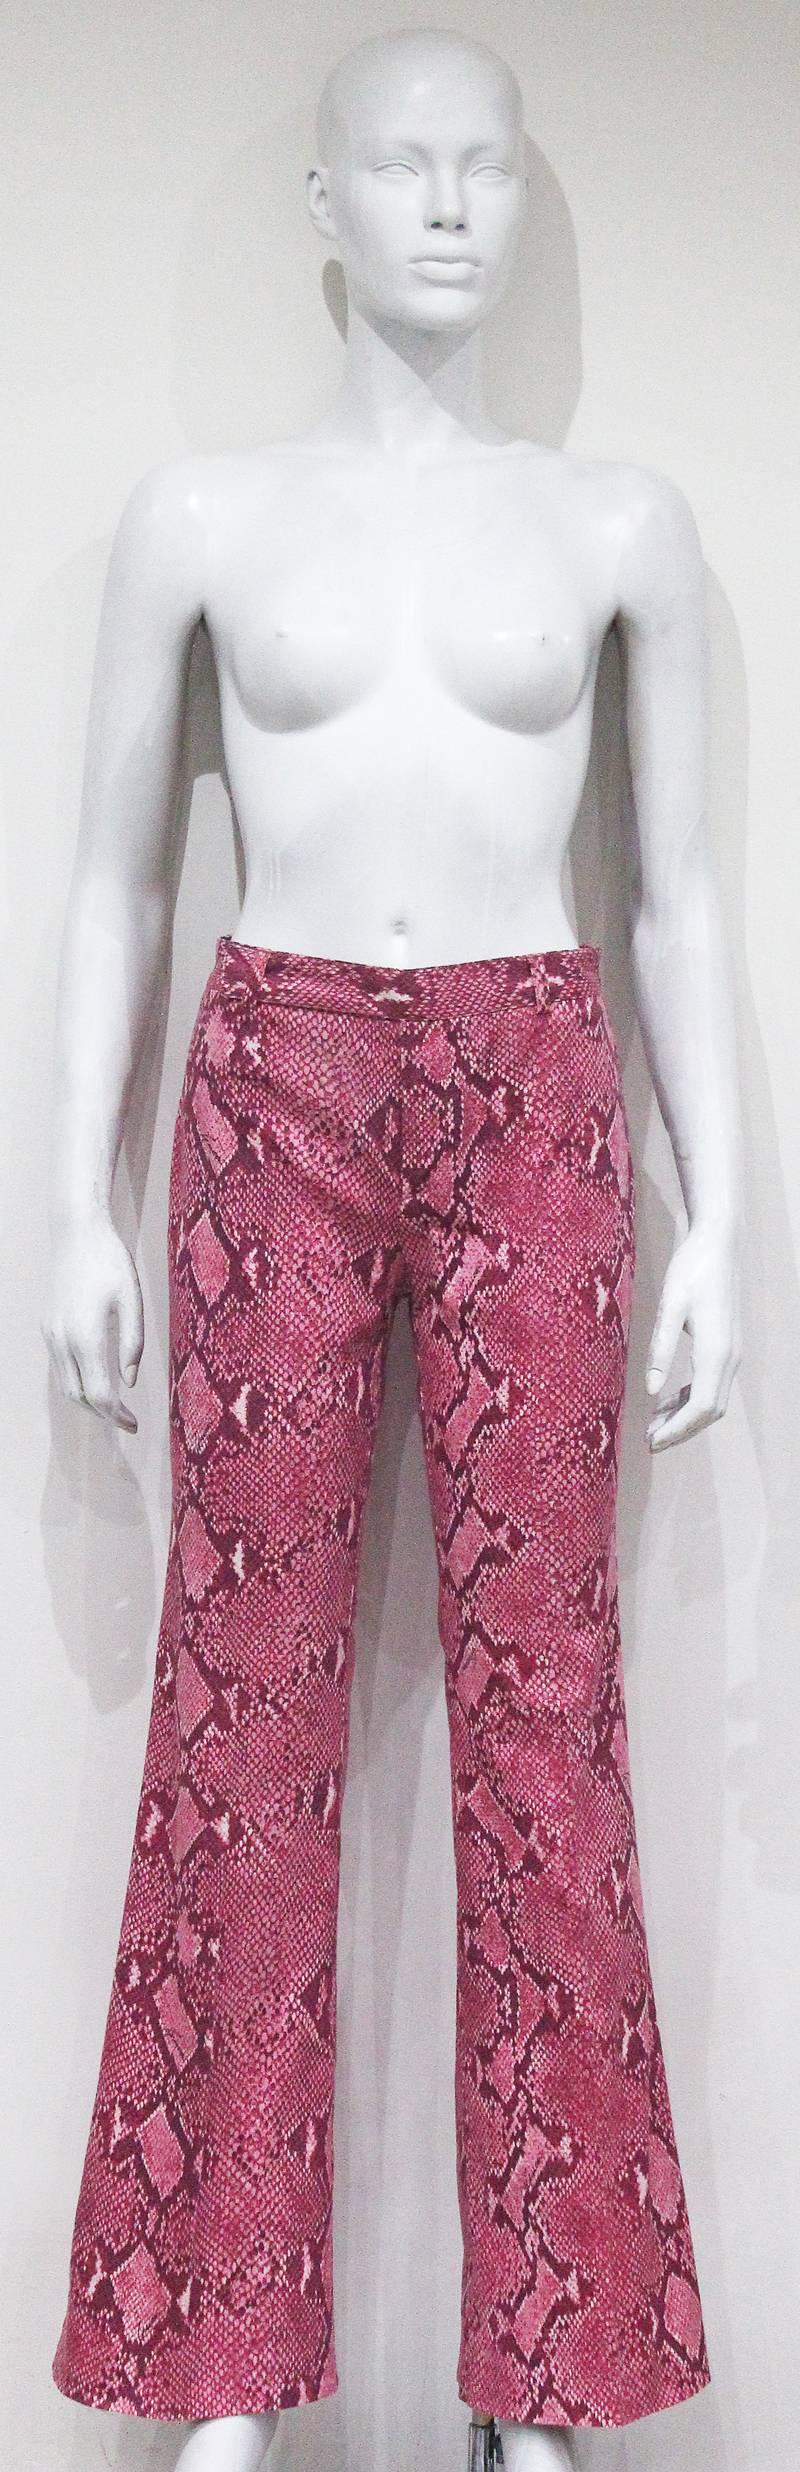 A pair of bell bottom pants by Tom Ford for Gucci from the Spring/Summer 2000 runway collection. The pants are in a hot pink python print and 100% cotton. 

It 38 - Fr 34 